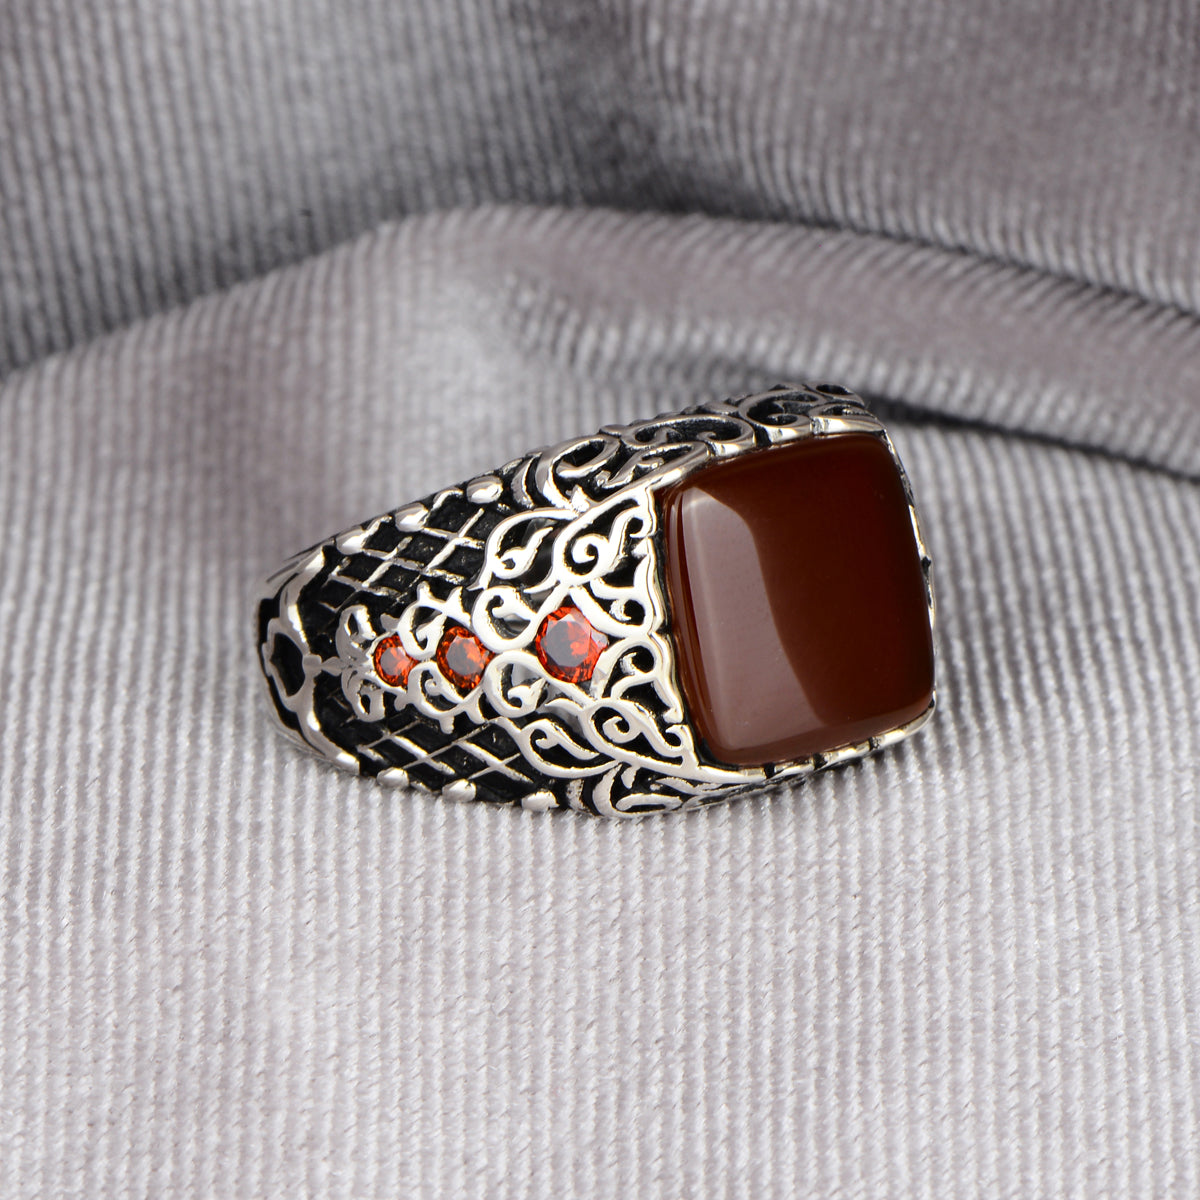 Silver Handmade Minimal Red Agate Stone Ring